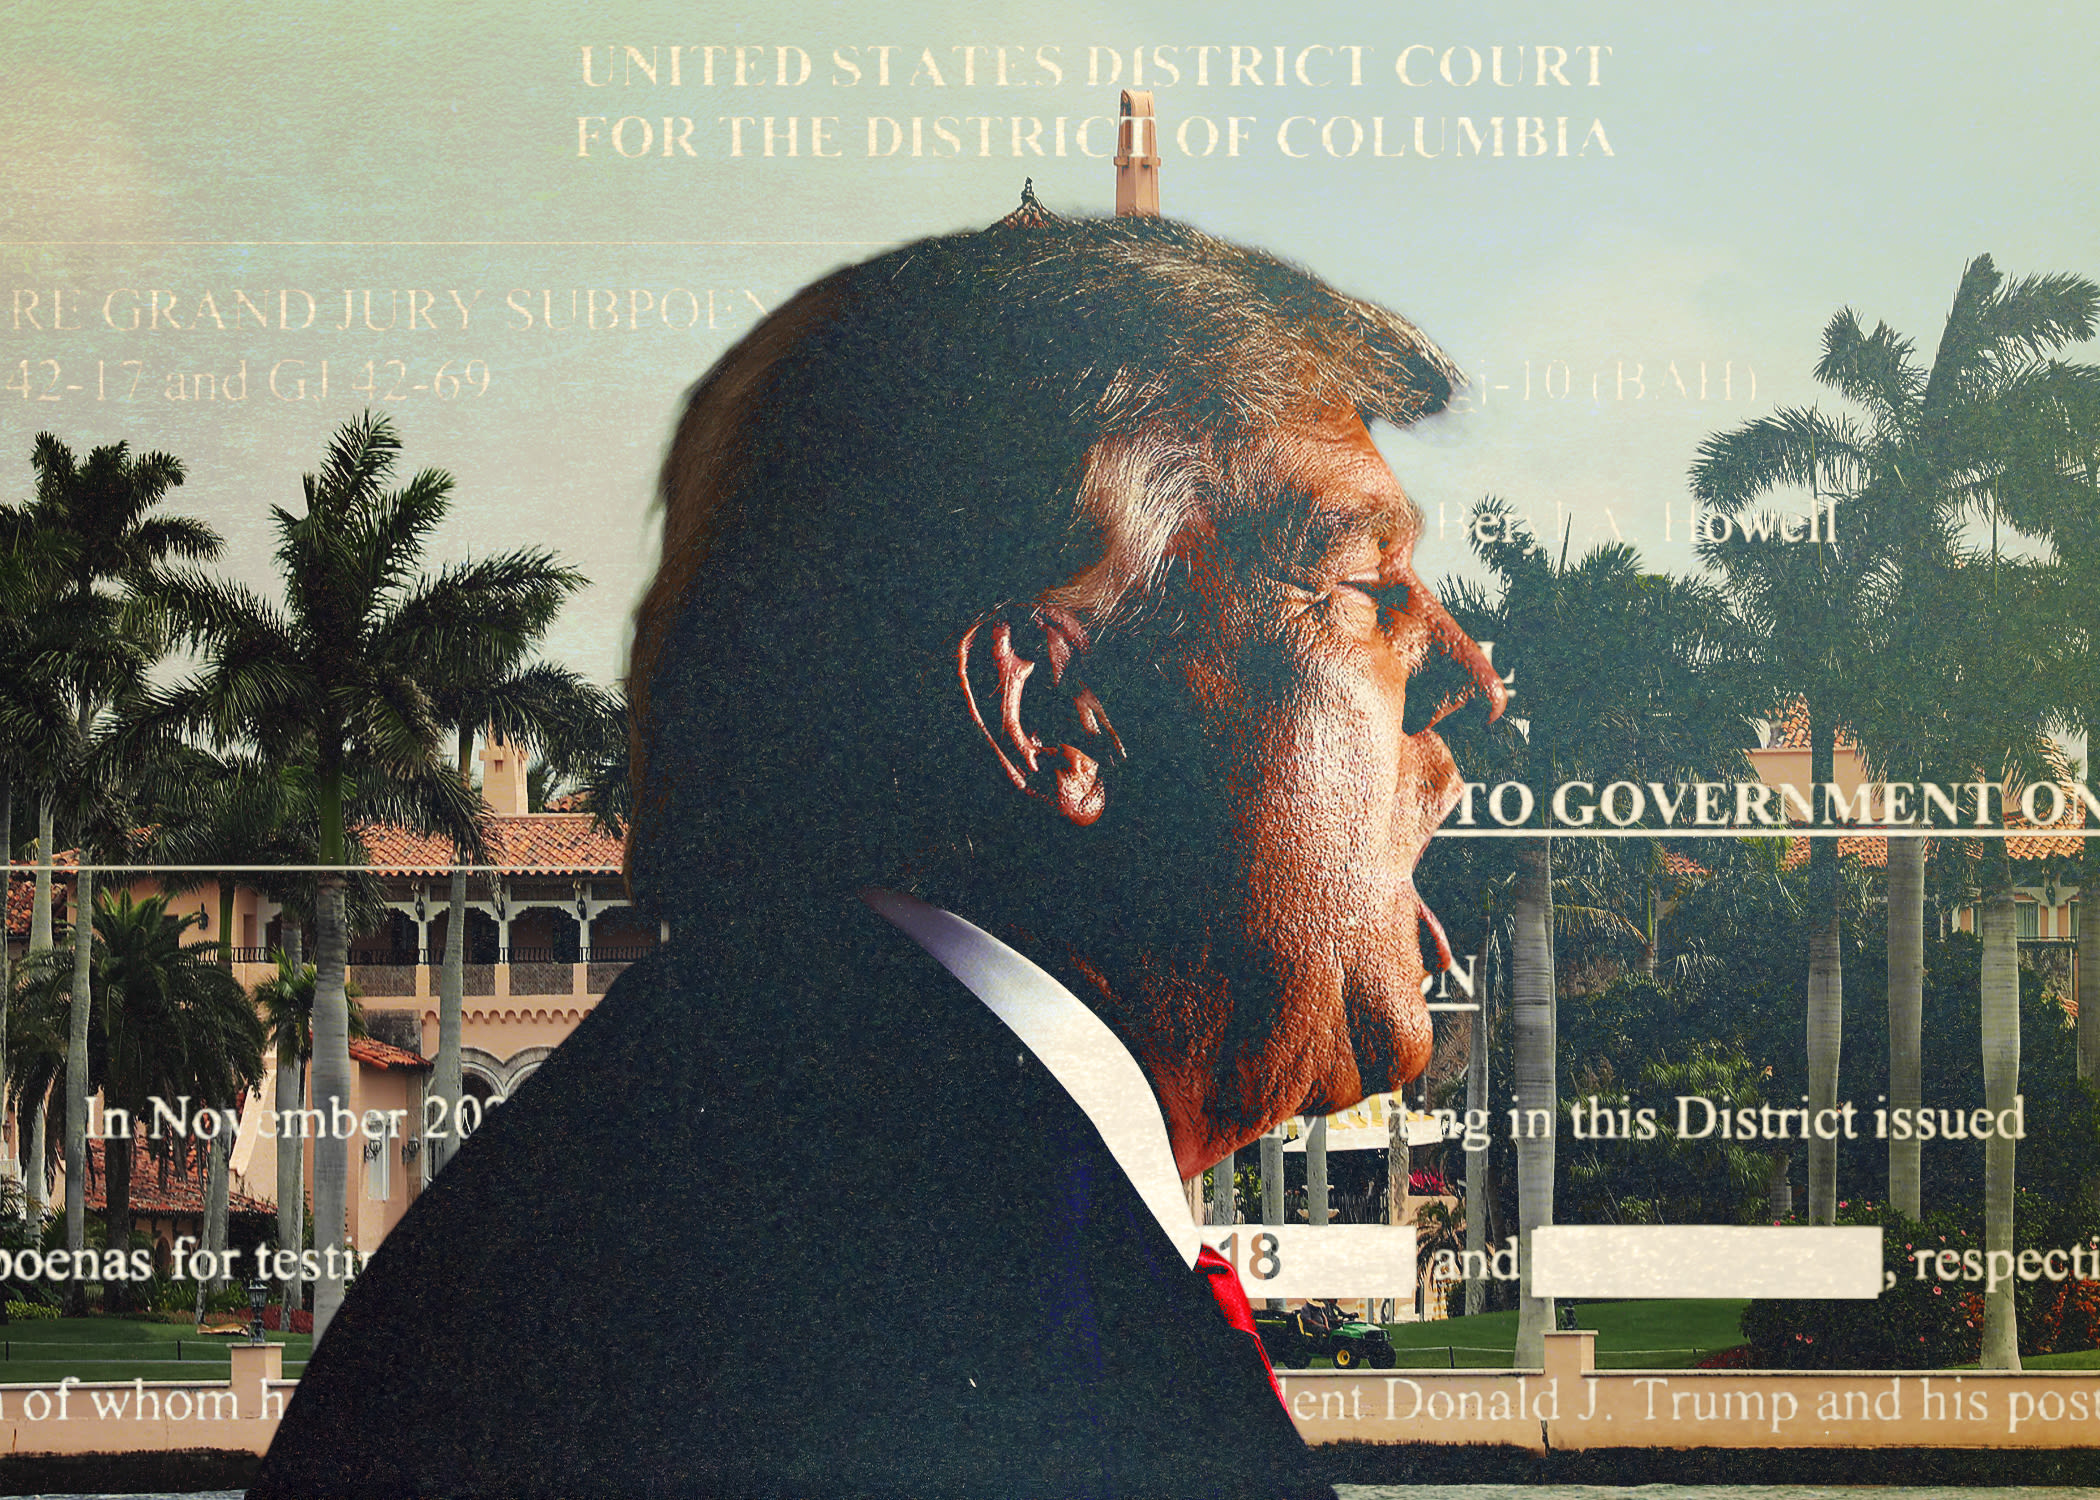 Federal Judge Outlines the ‘Shell Game’ Played with Classified Docs at Mar-a-Lago